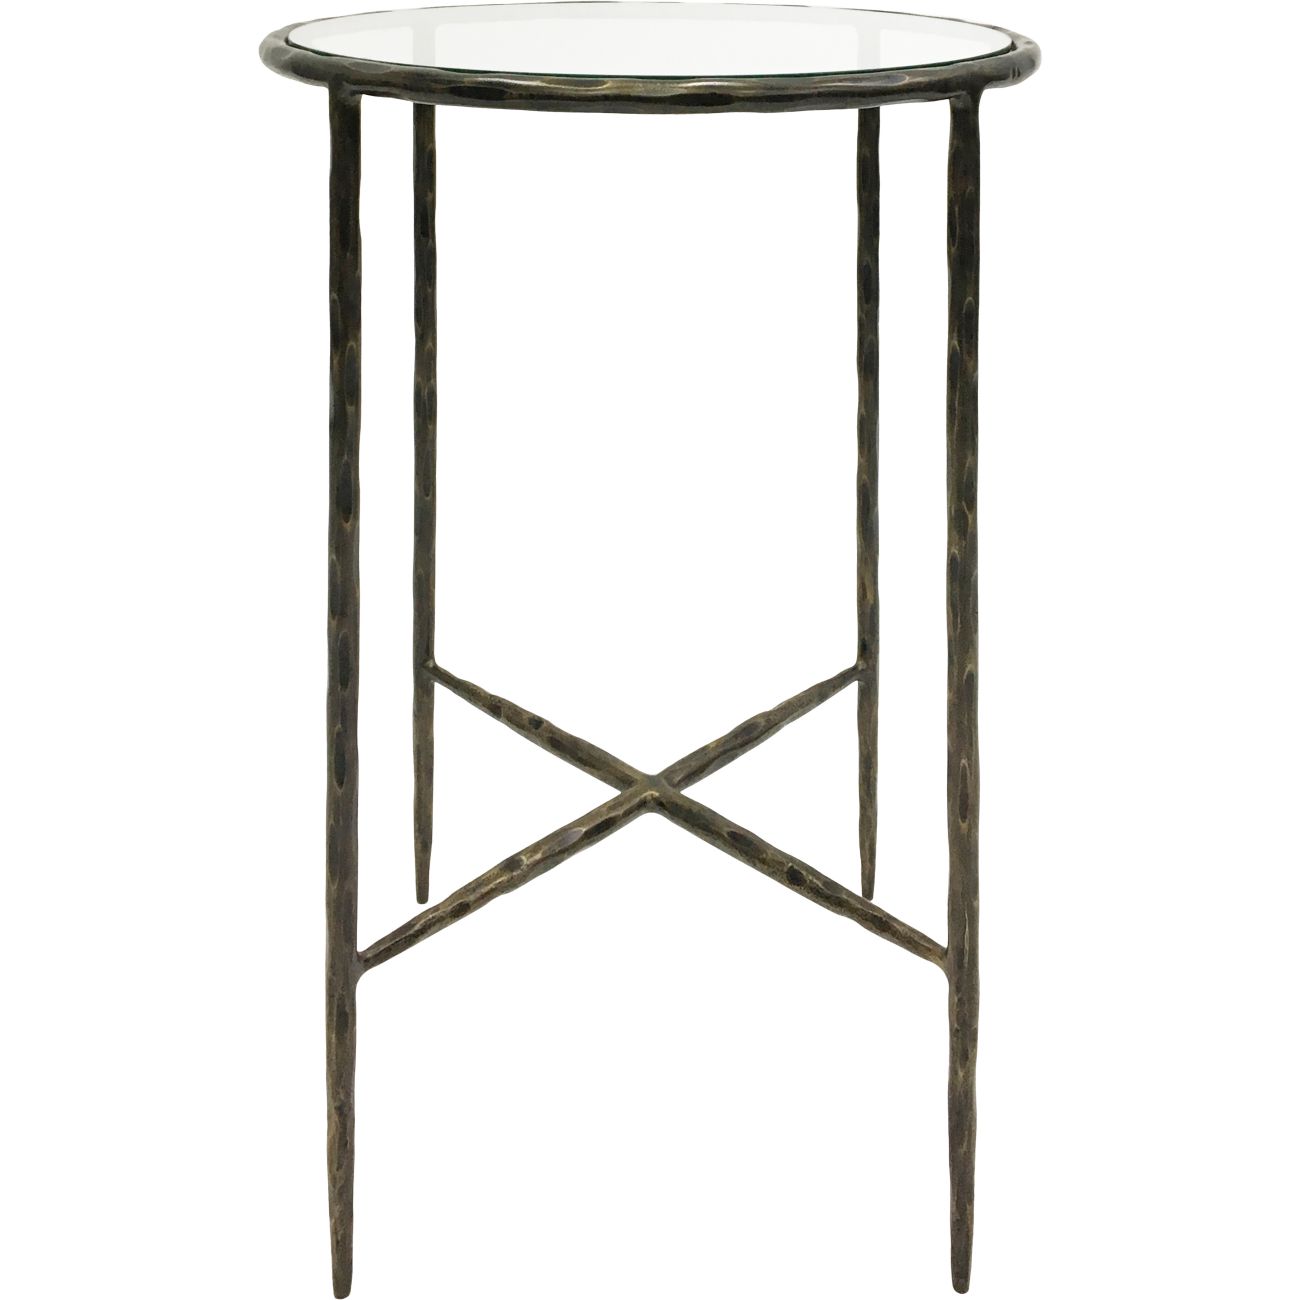 Patterdale Side Table